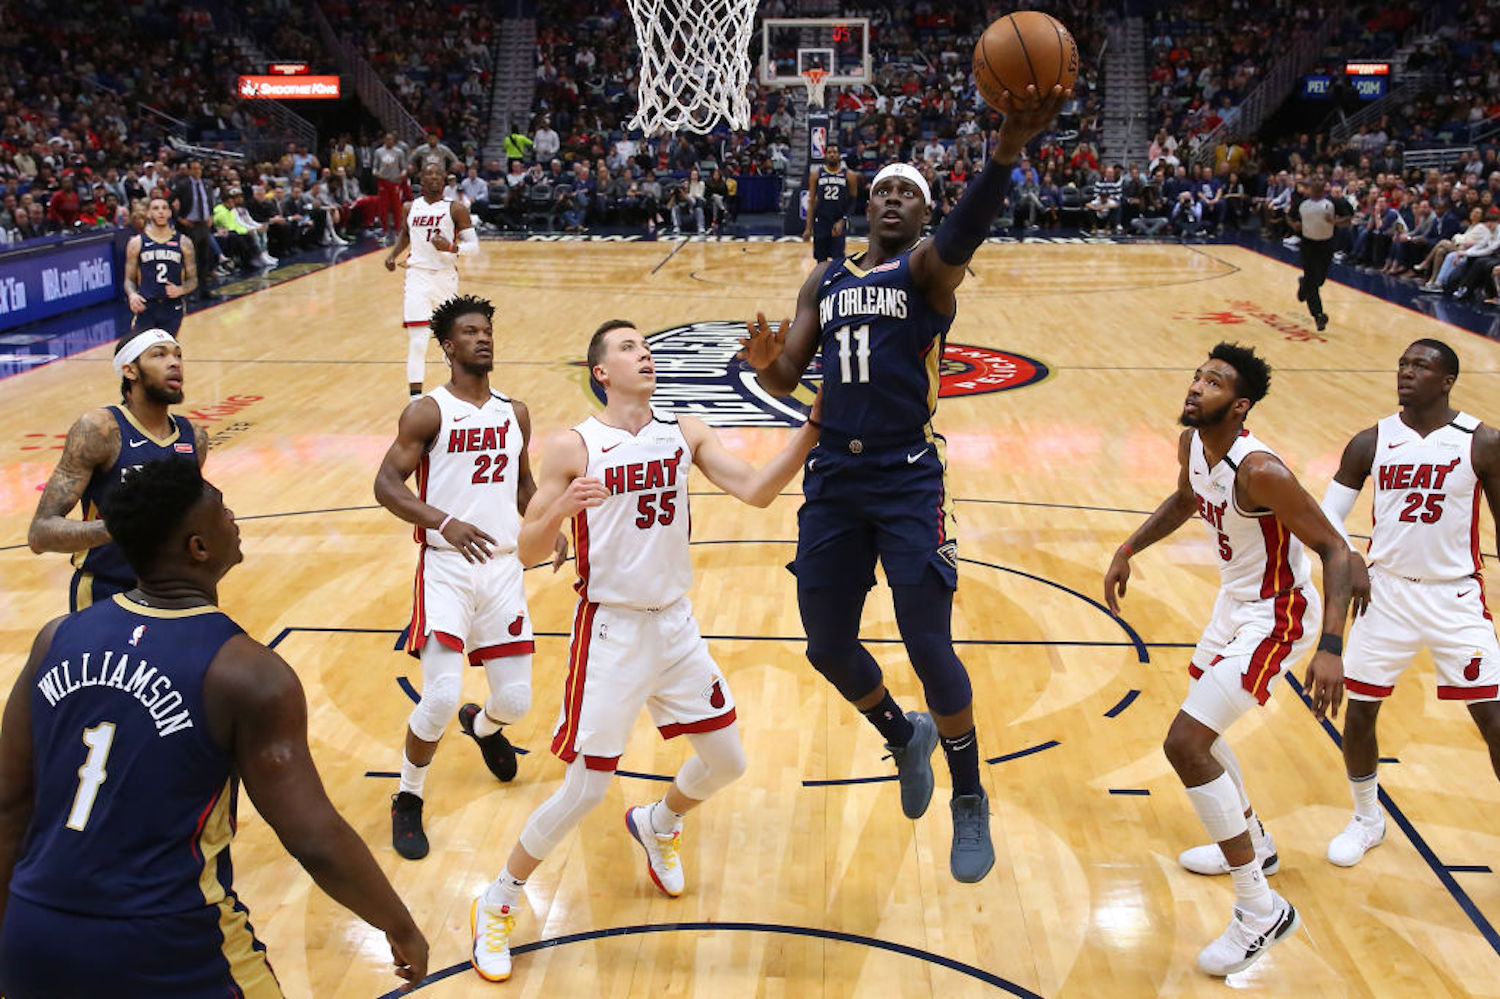 The Pelicans gave former All-Star Jrue Holiday $131 million three years ago, but now they're trying to shop him ahead of the 2020-21 season.